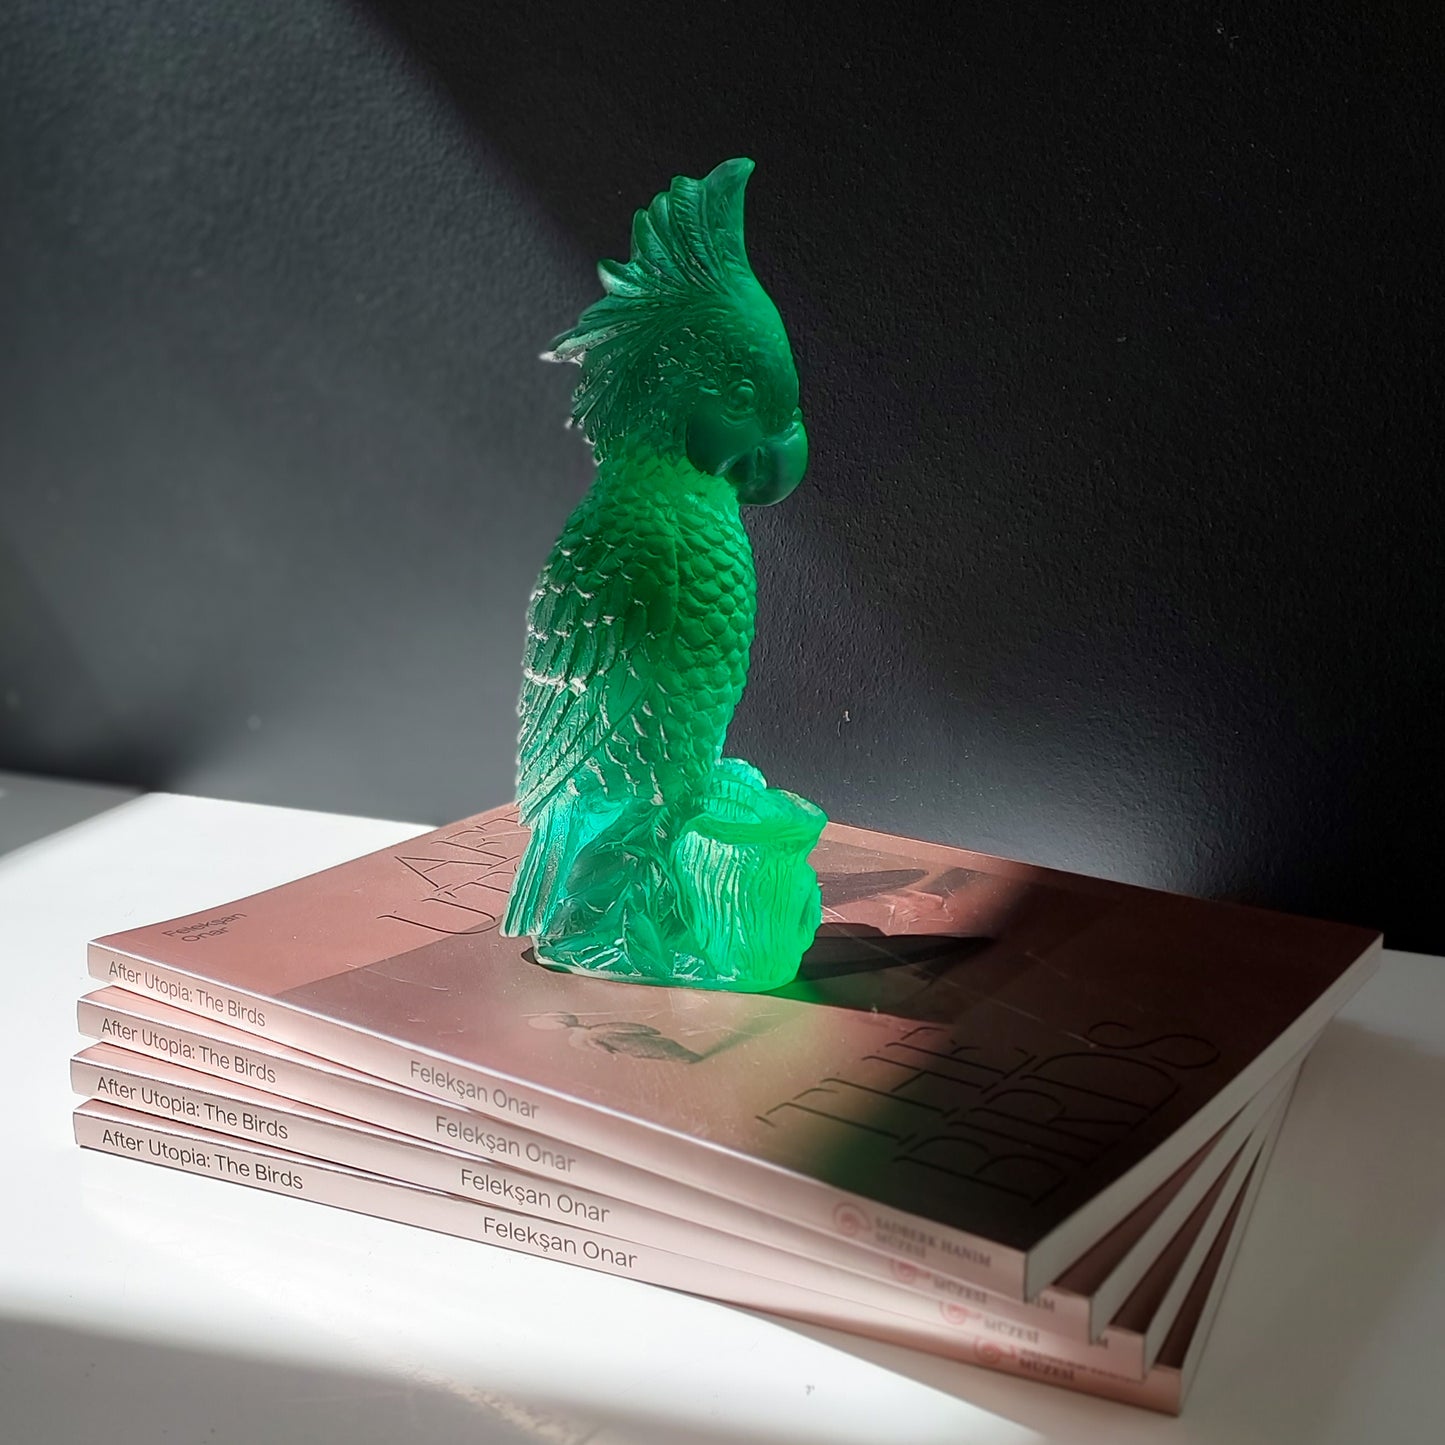 Rio Parrot Cast Glass Sculpture Emerald Green on stack of books